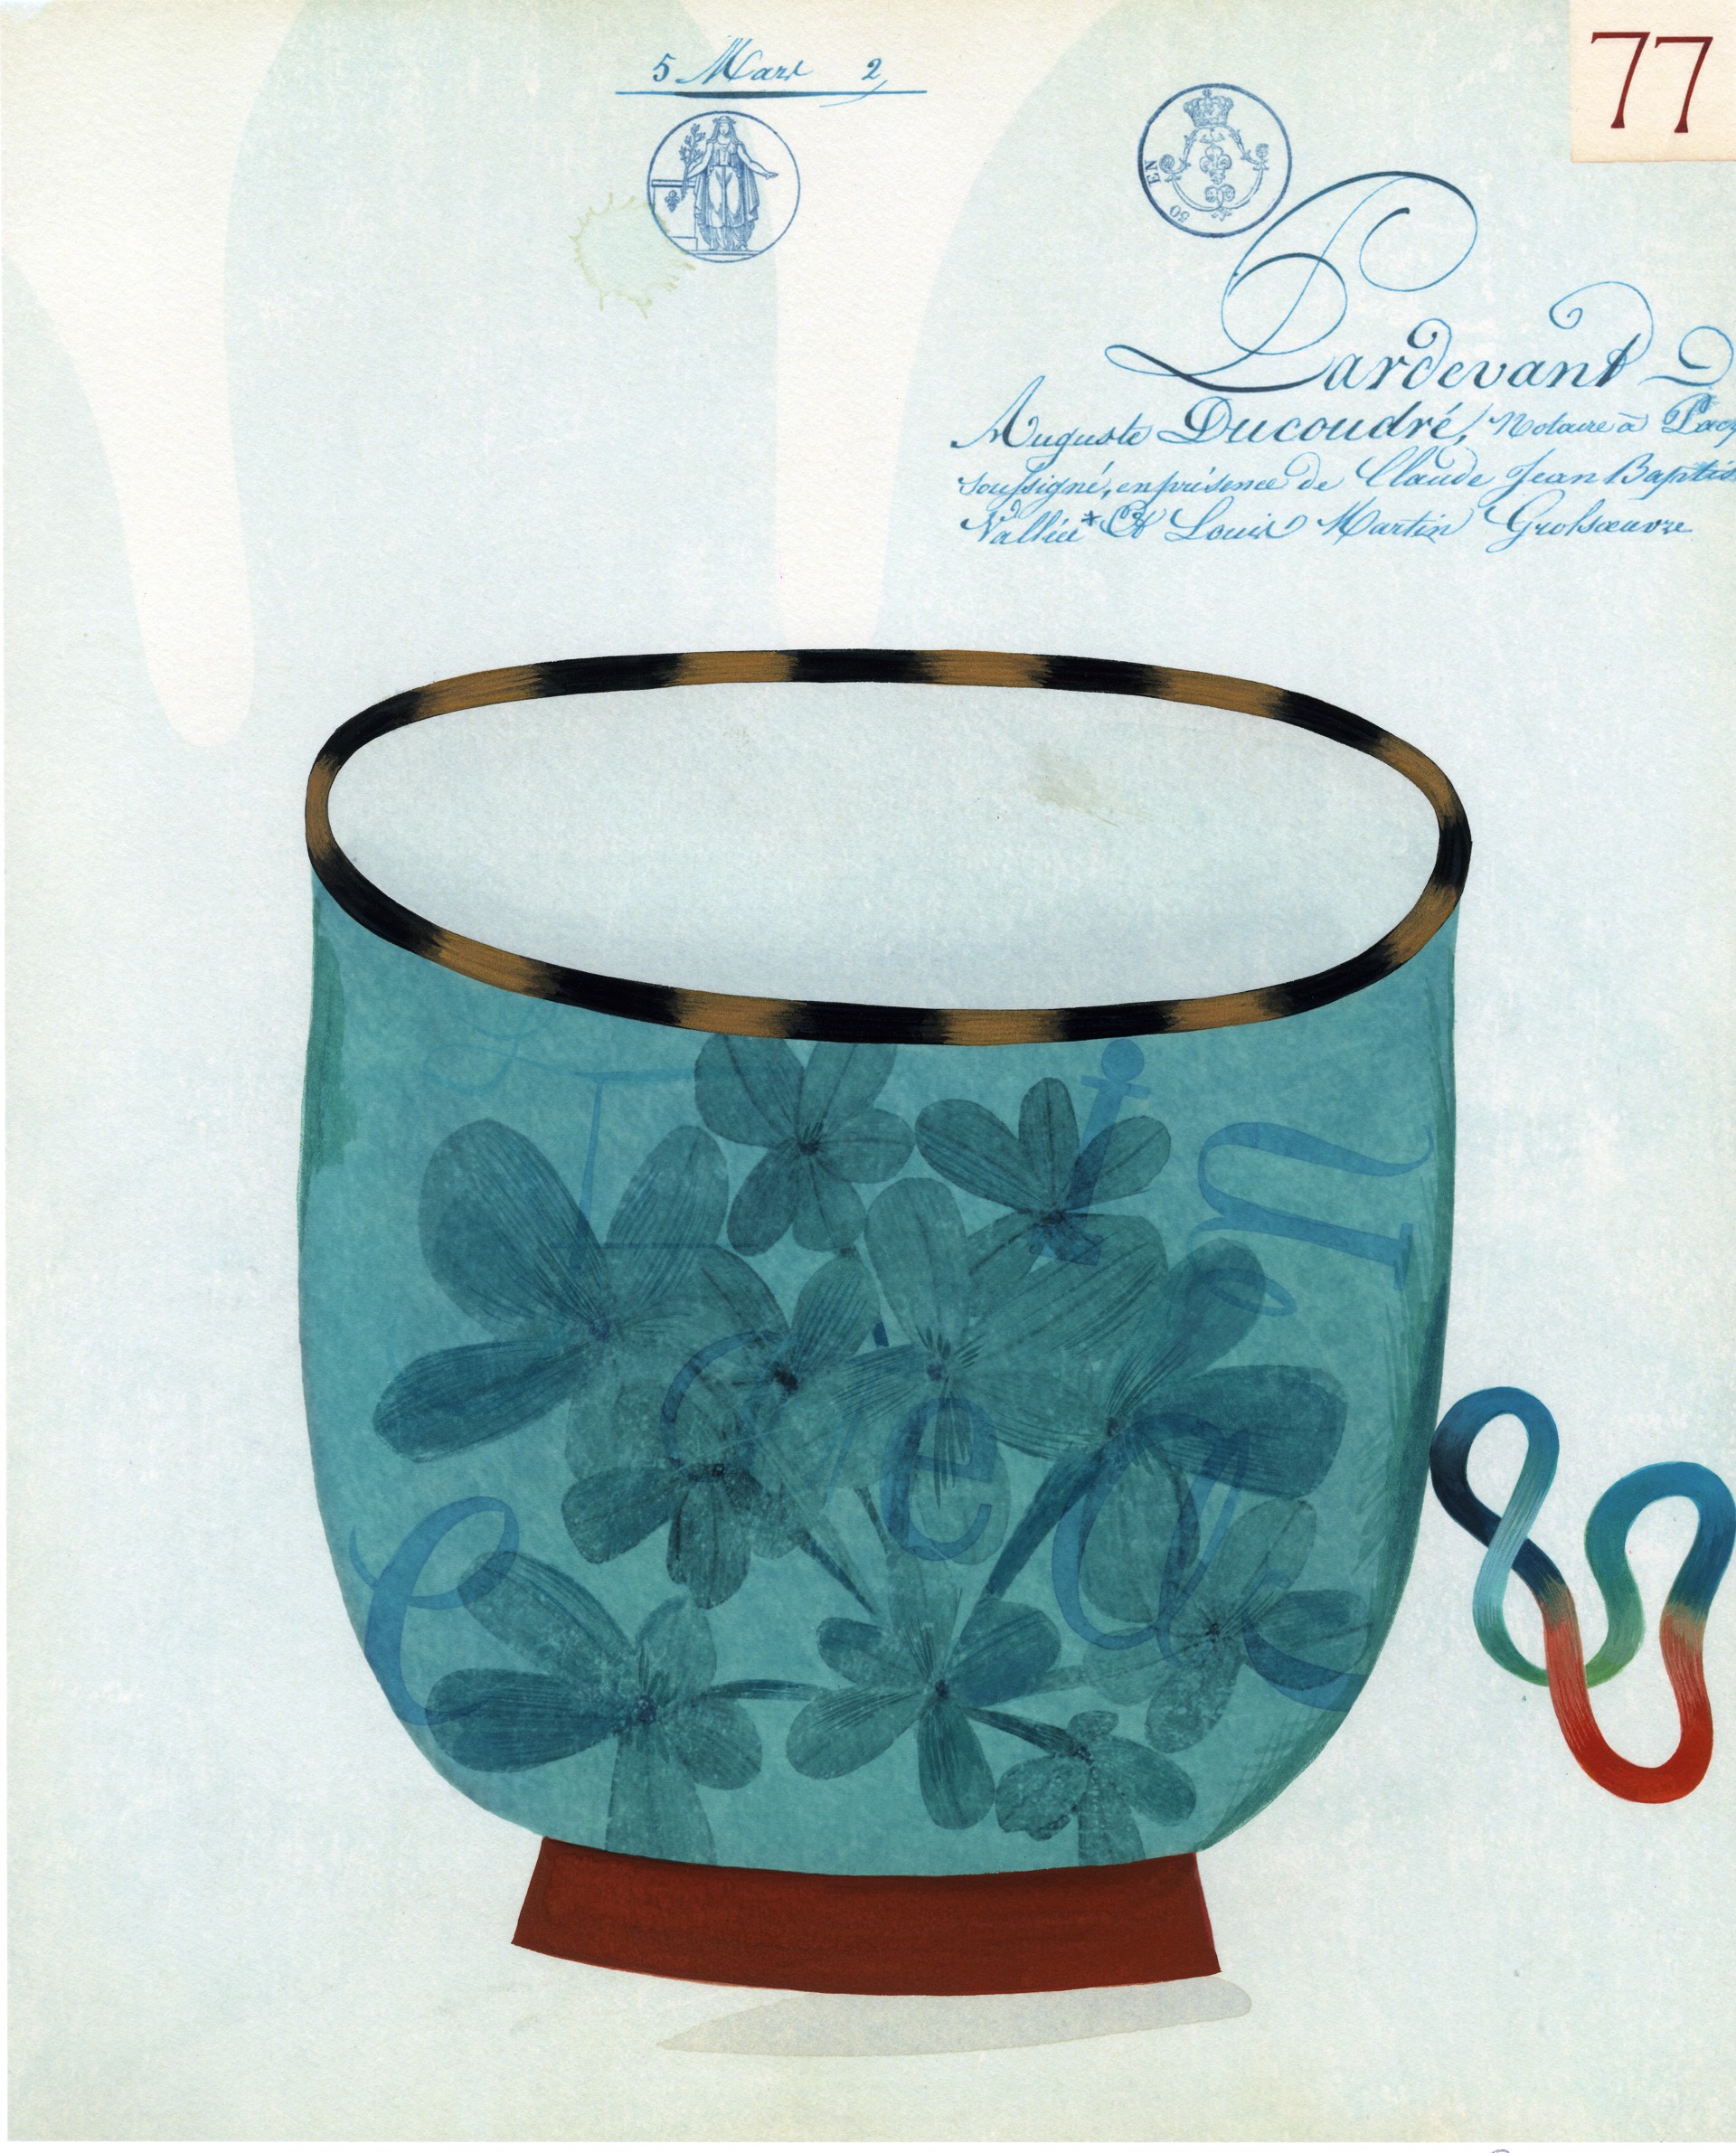 Cup No. 77 by Anne Smith